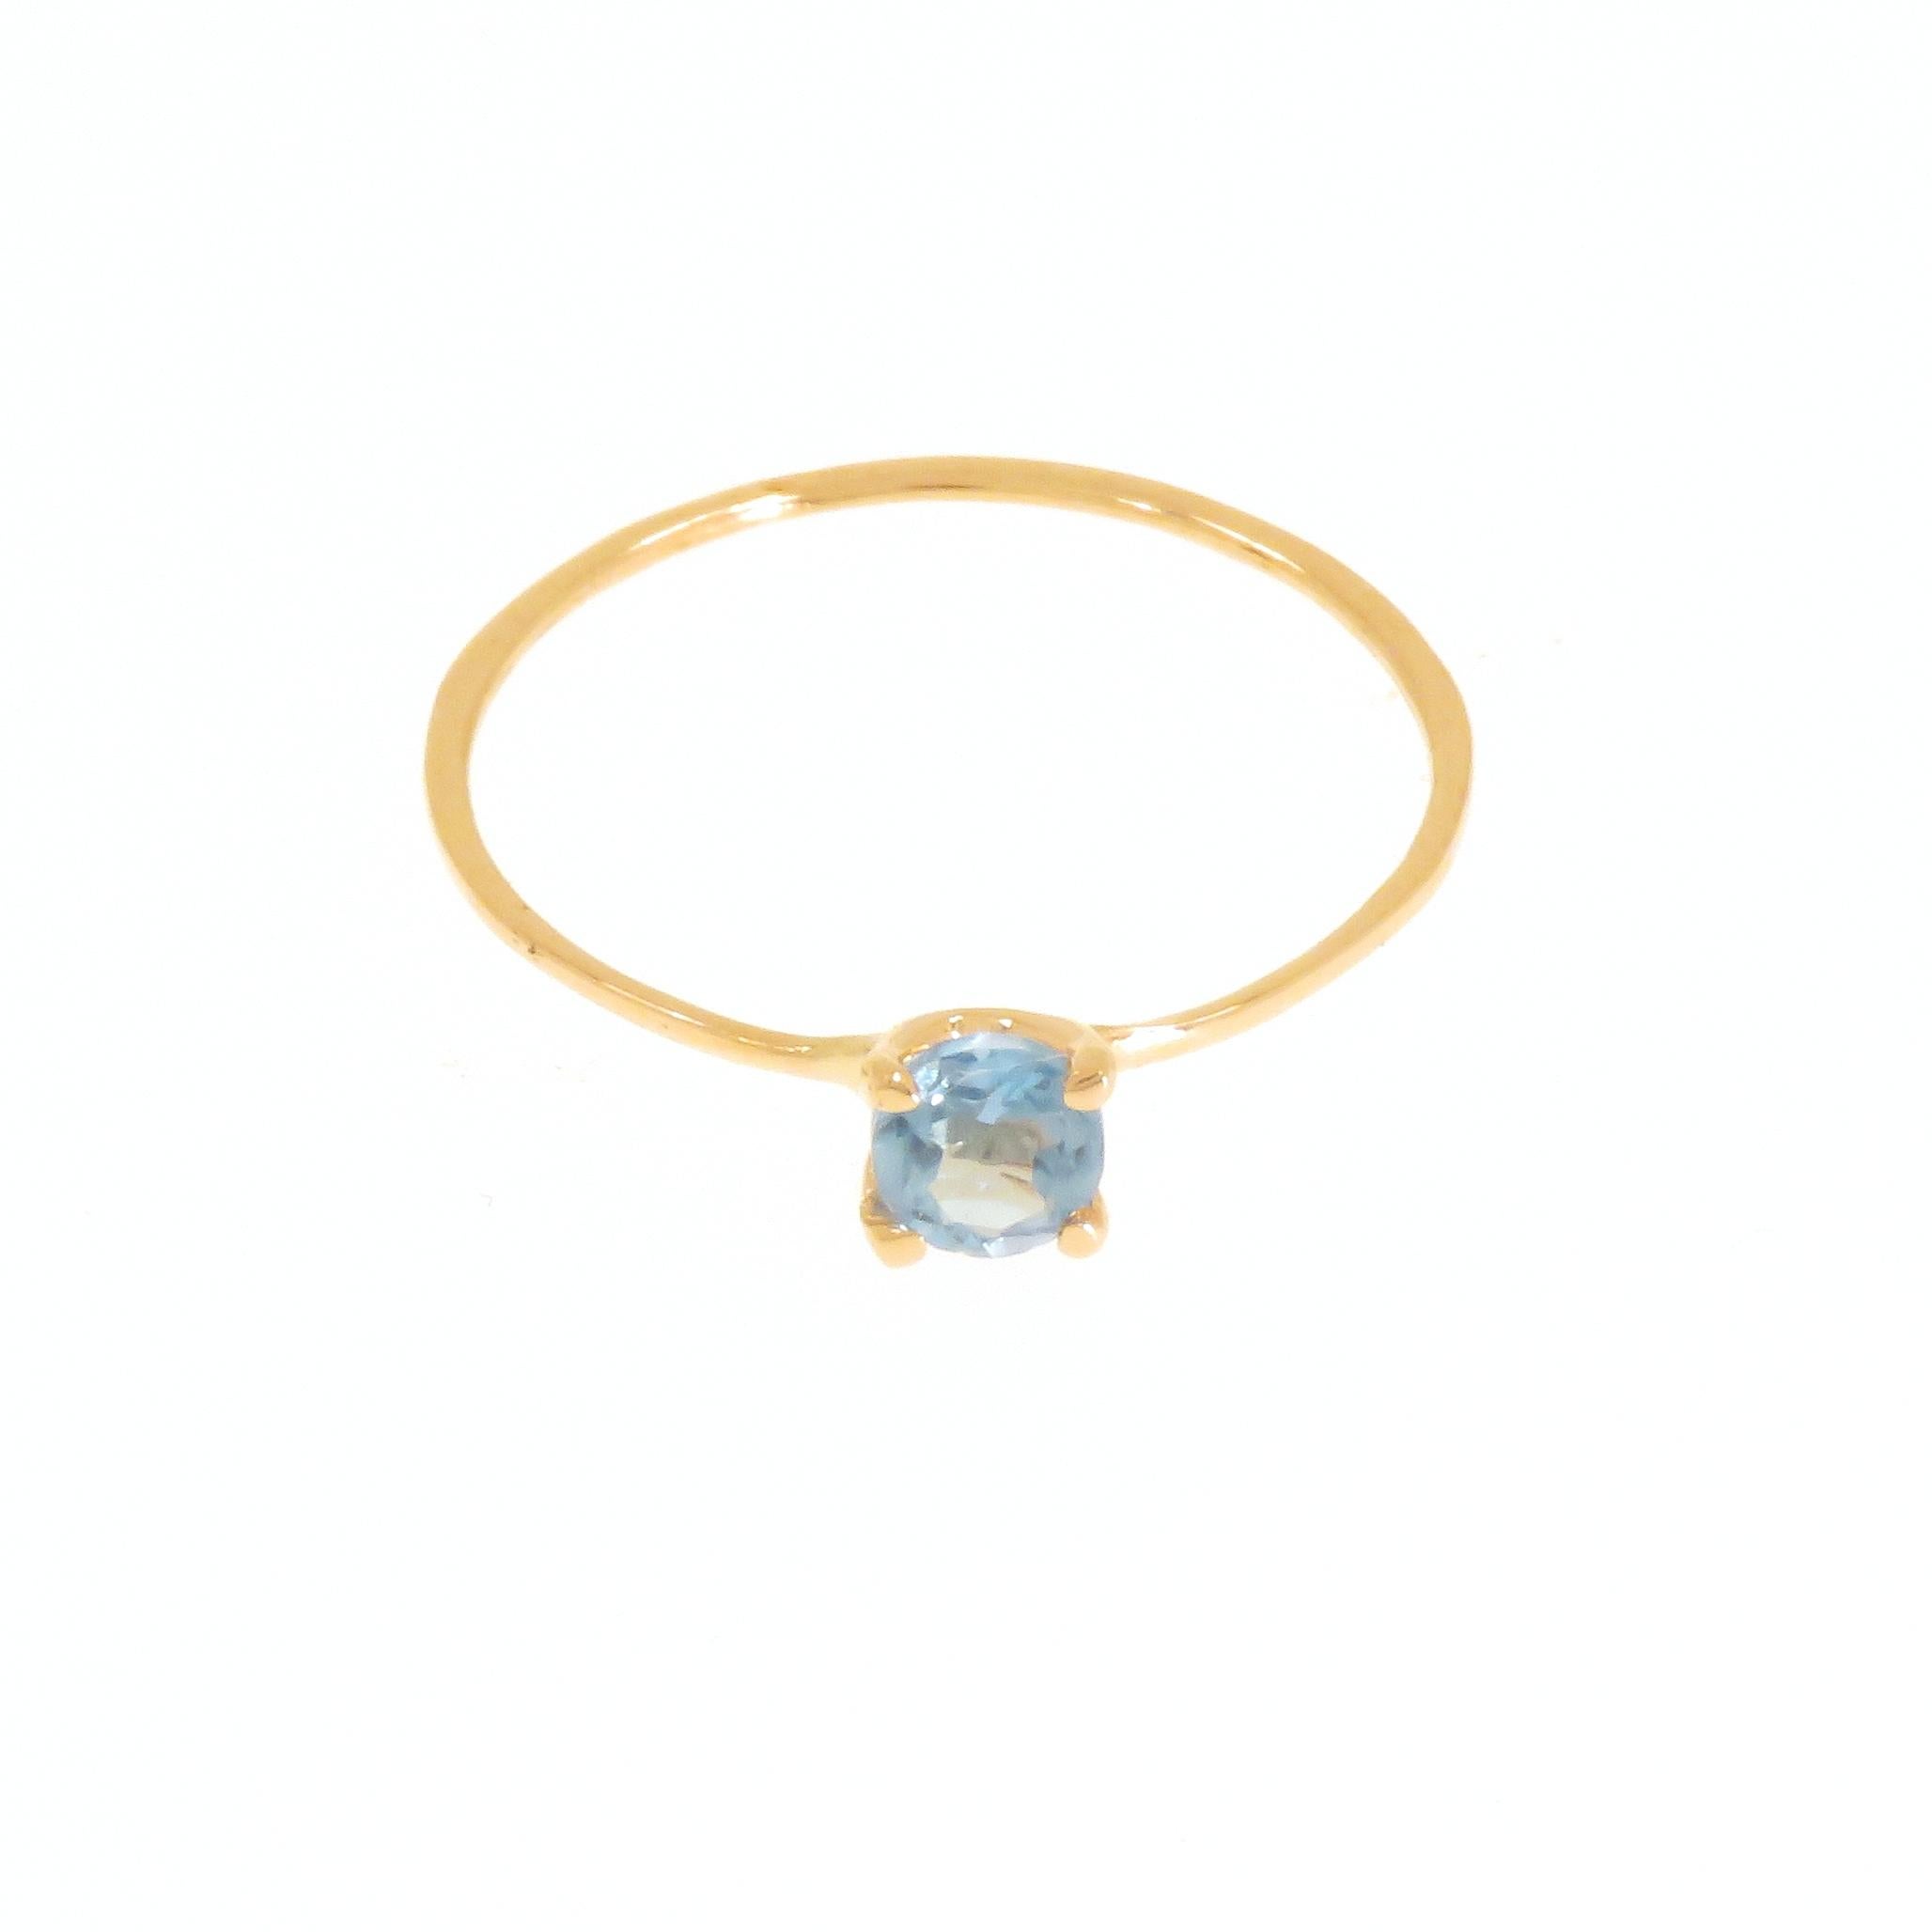 Stacking ring handmade in 9 carat rose gold with brilliant cut blue topaz, diameter 0.157 inches. Finger size: US size 6, Italian size 12, UK size M 1/2, French size 52. The ring can be re-sized to the customer's size before shipping. Total weight: